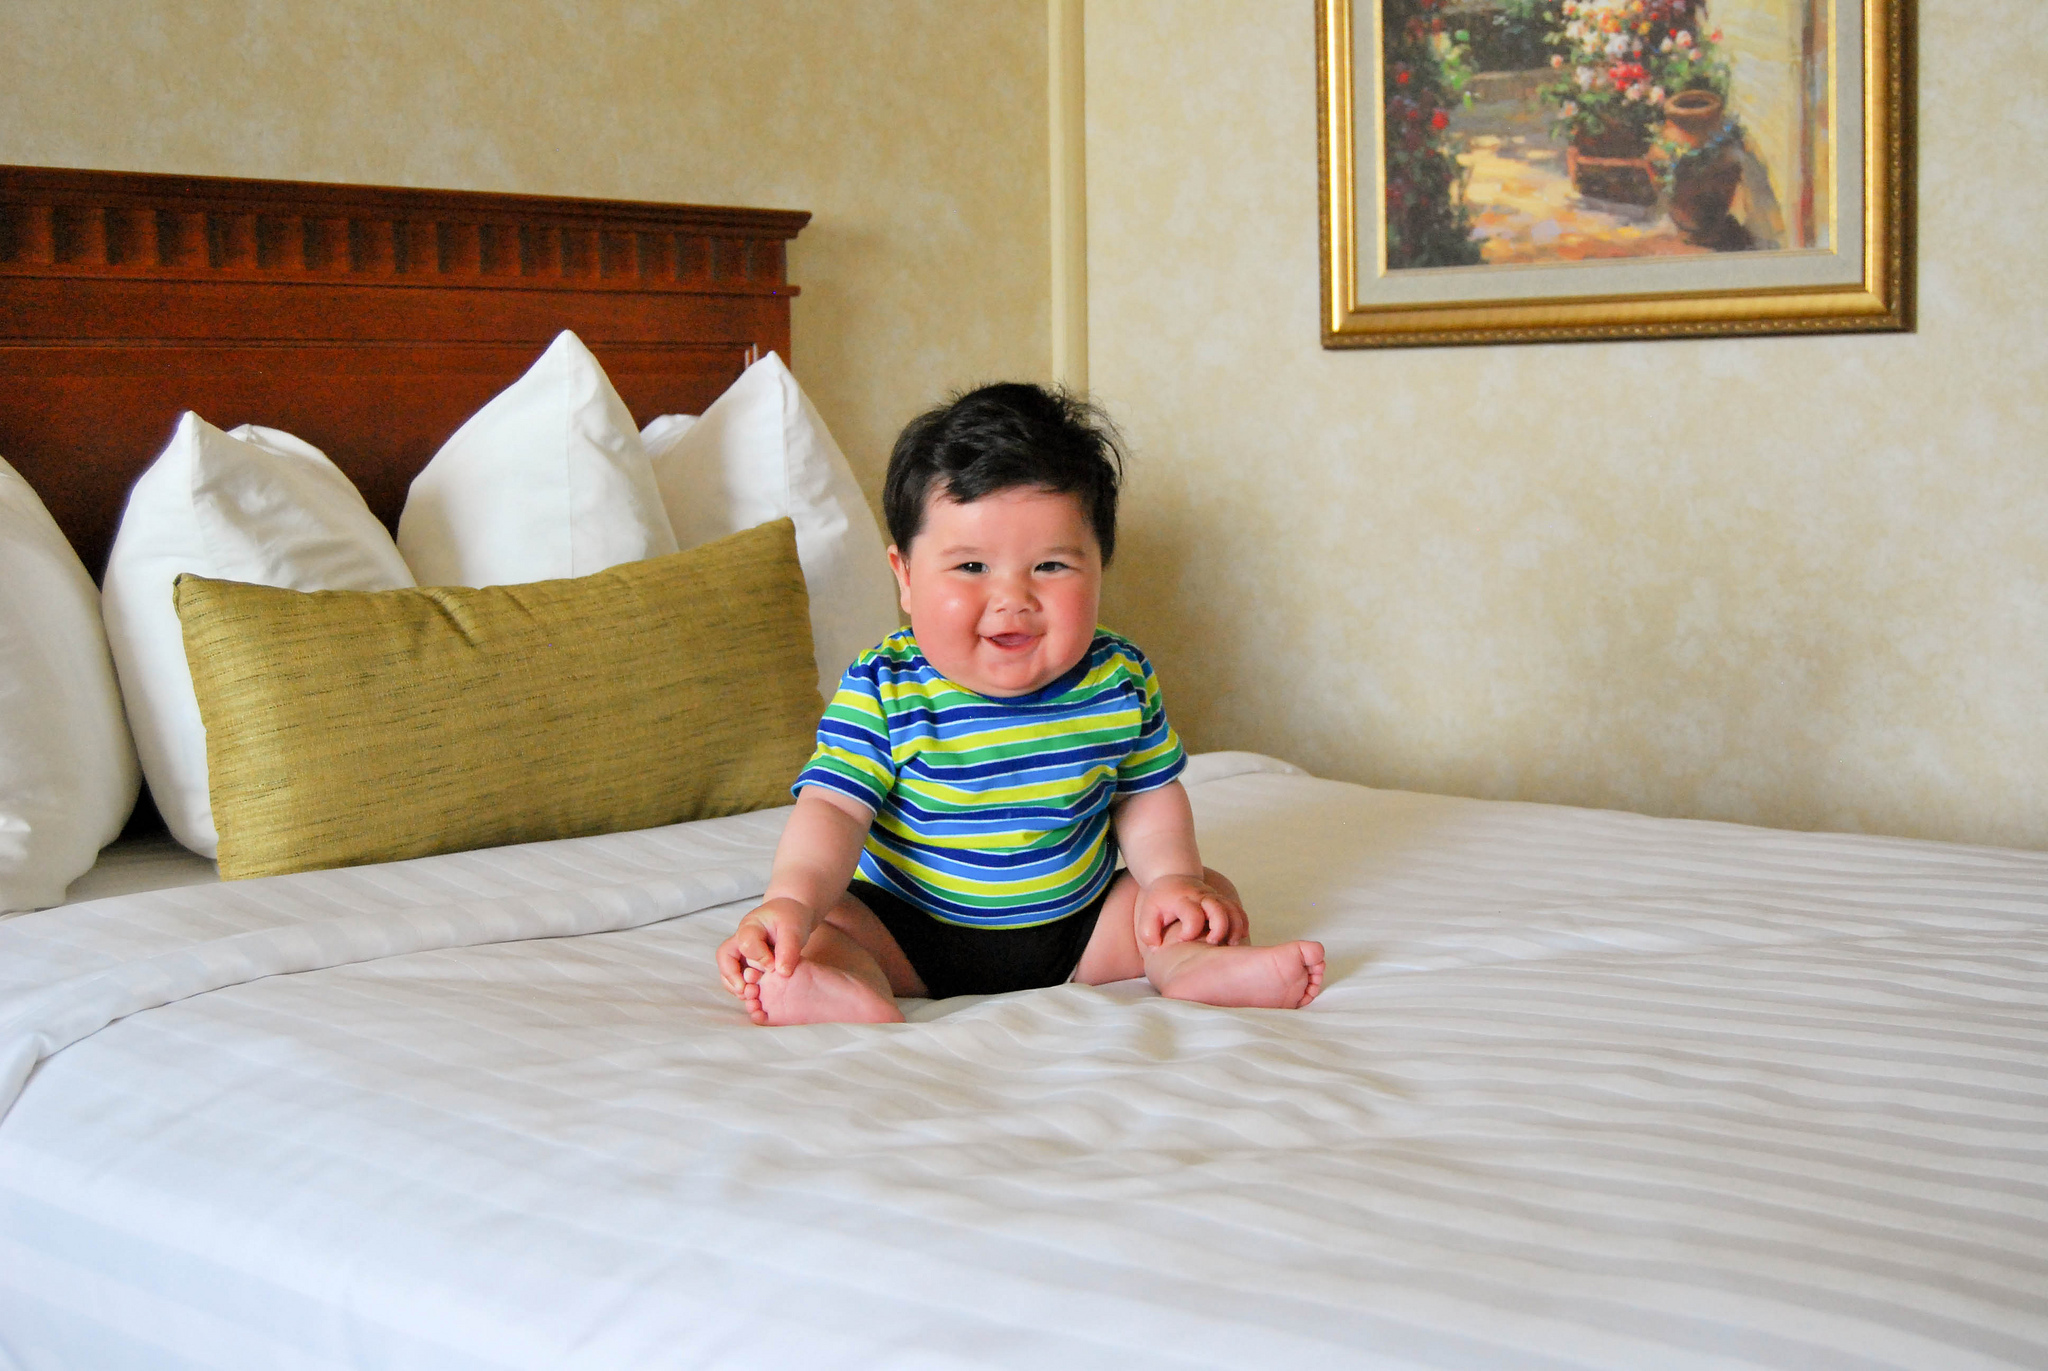 7 Hotel Hacks To Make Your Room More Baby Friendly